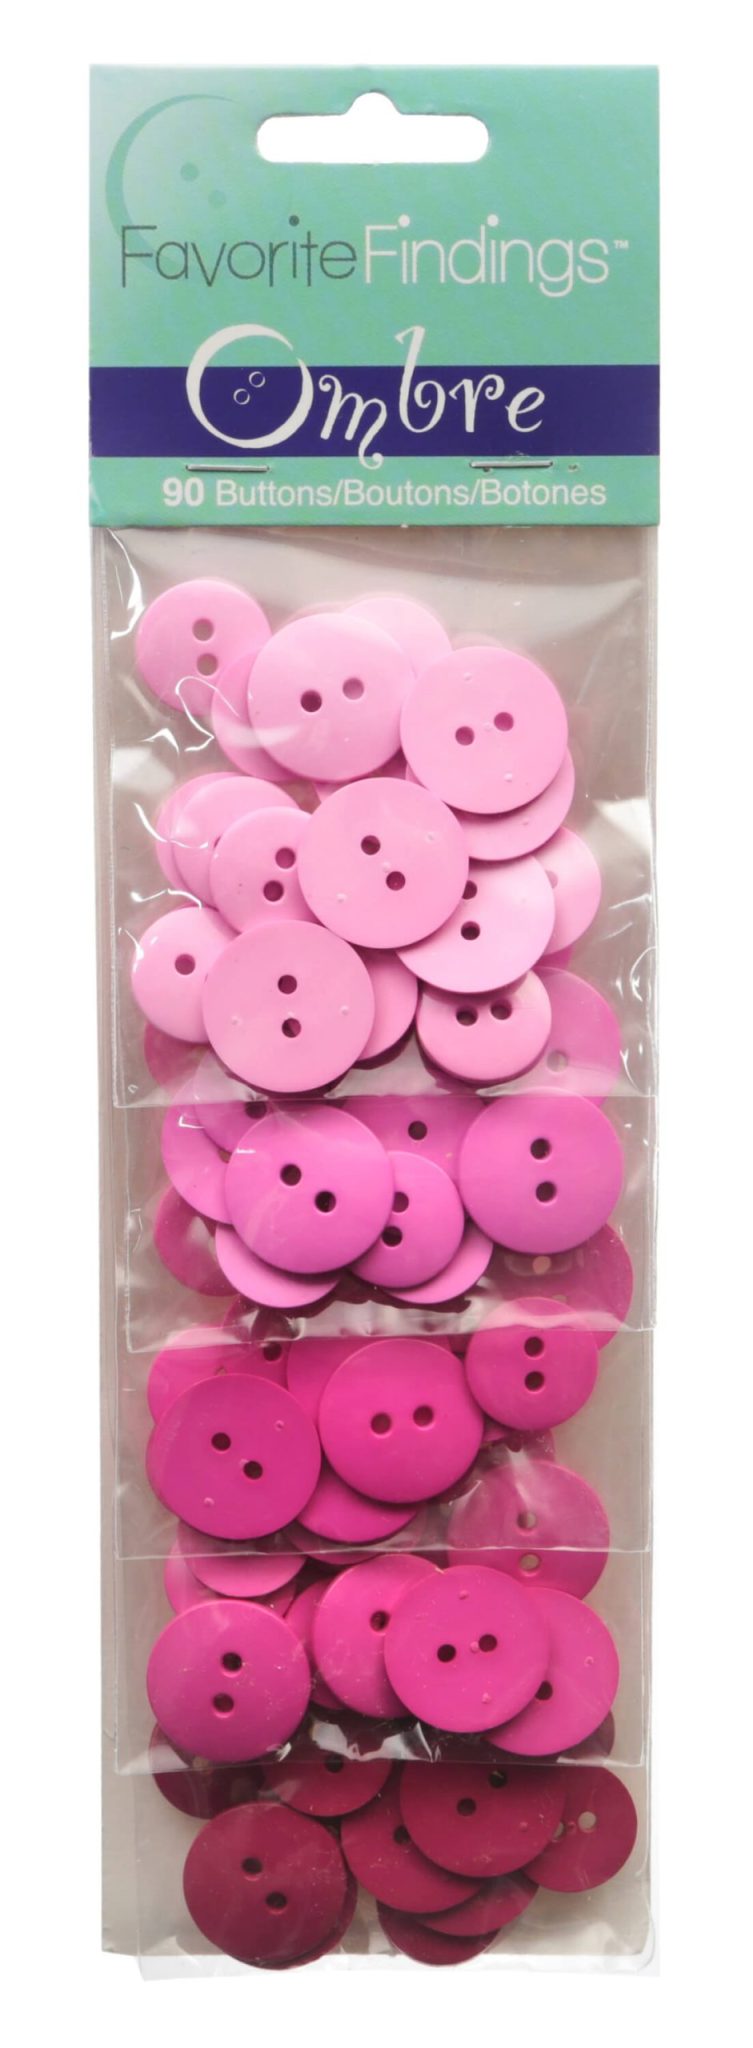 Ombre 90 Button Shade Pack - 5 Shades of Pink 16mm / 19mm Buttons